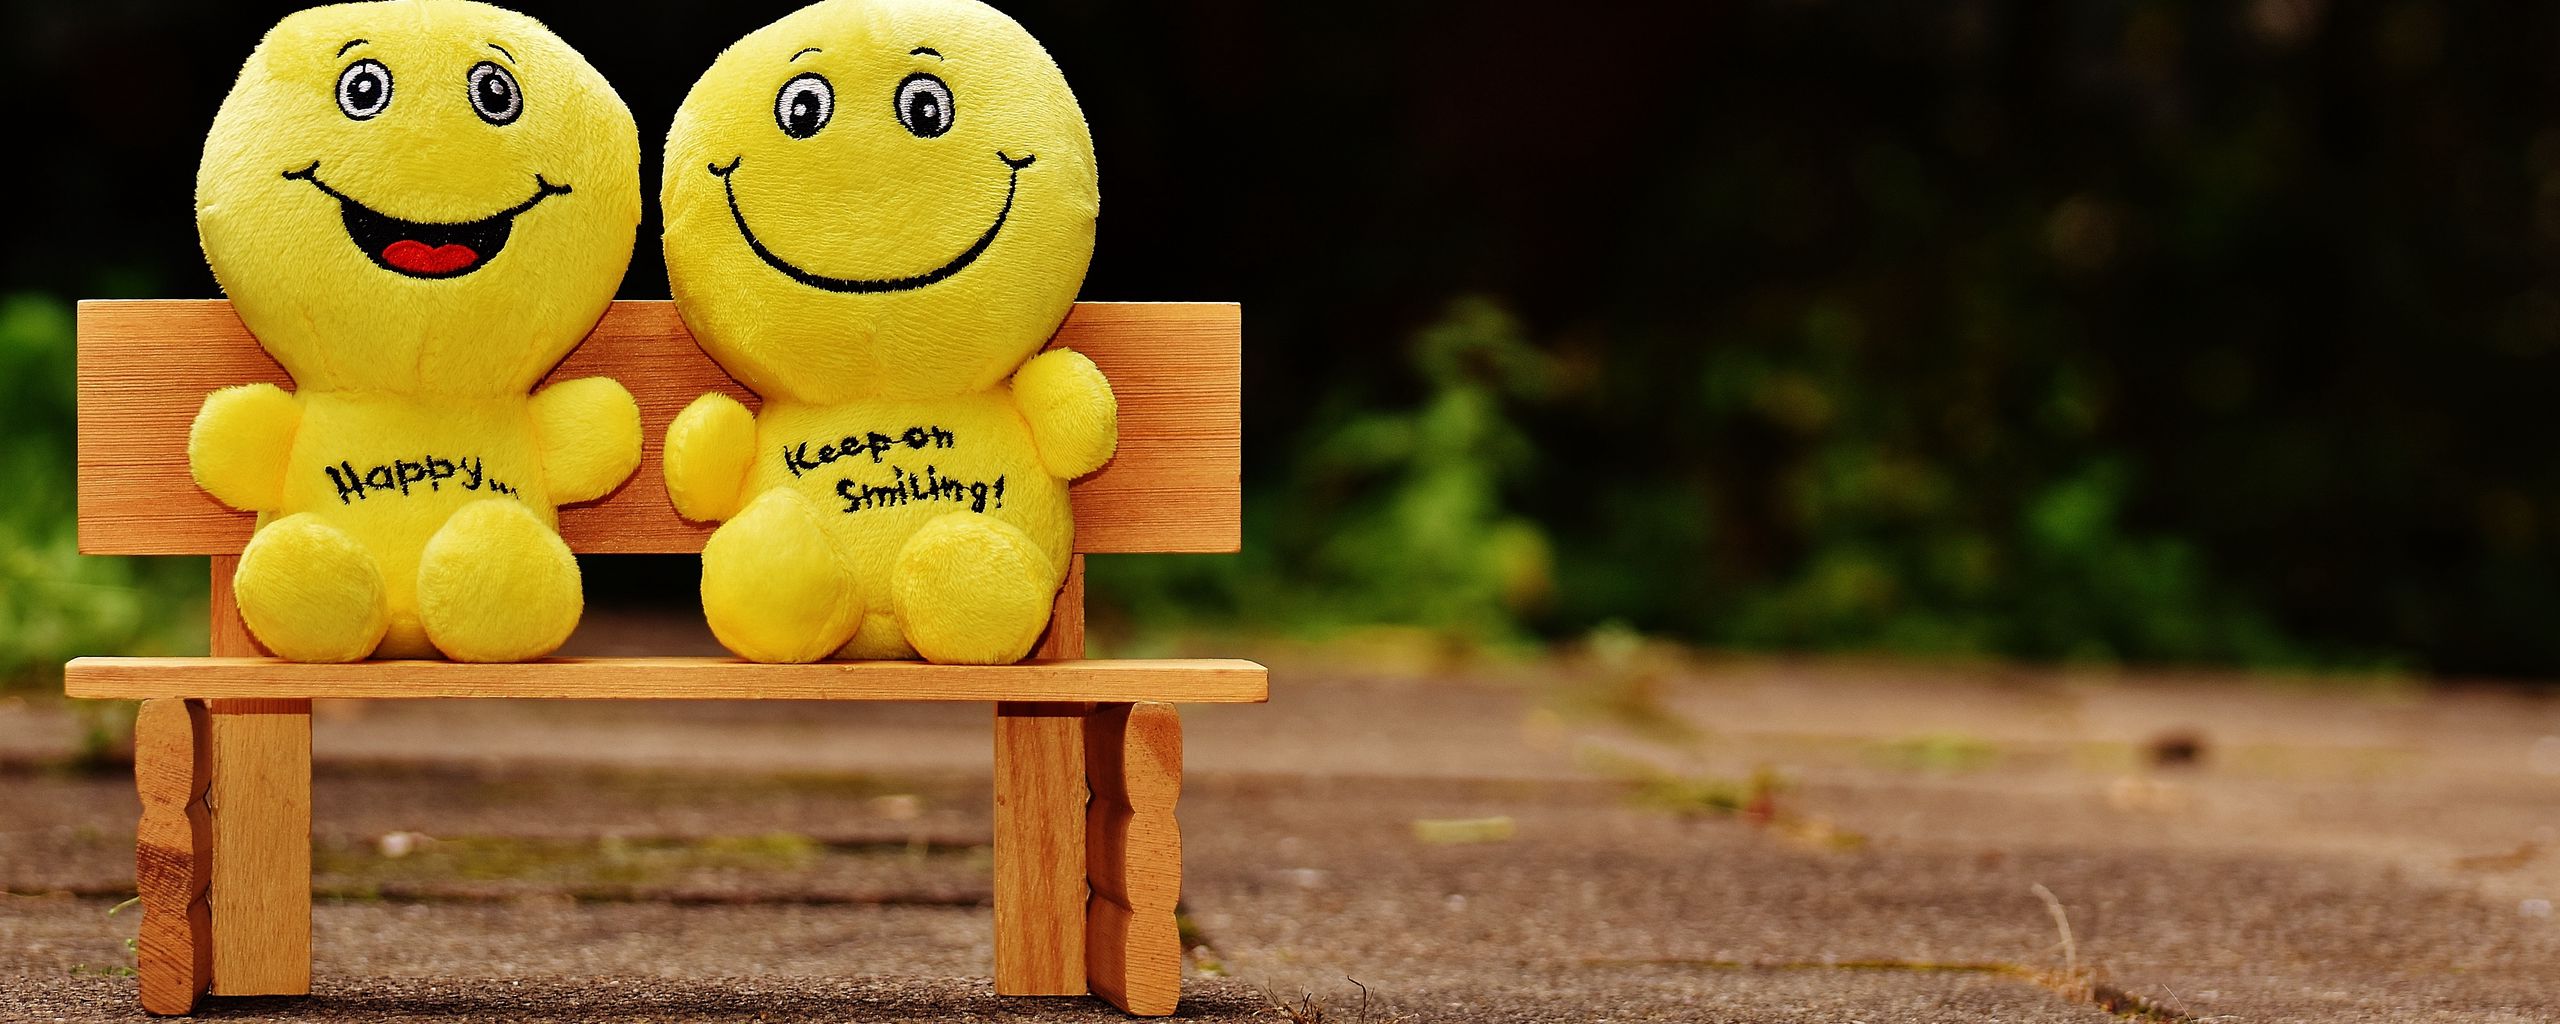 2560x1024 Wallpaper smiles, happy, cheerful, smile, bench, cute